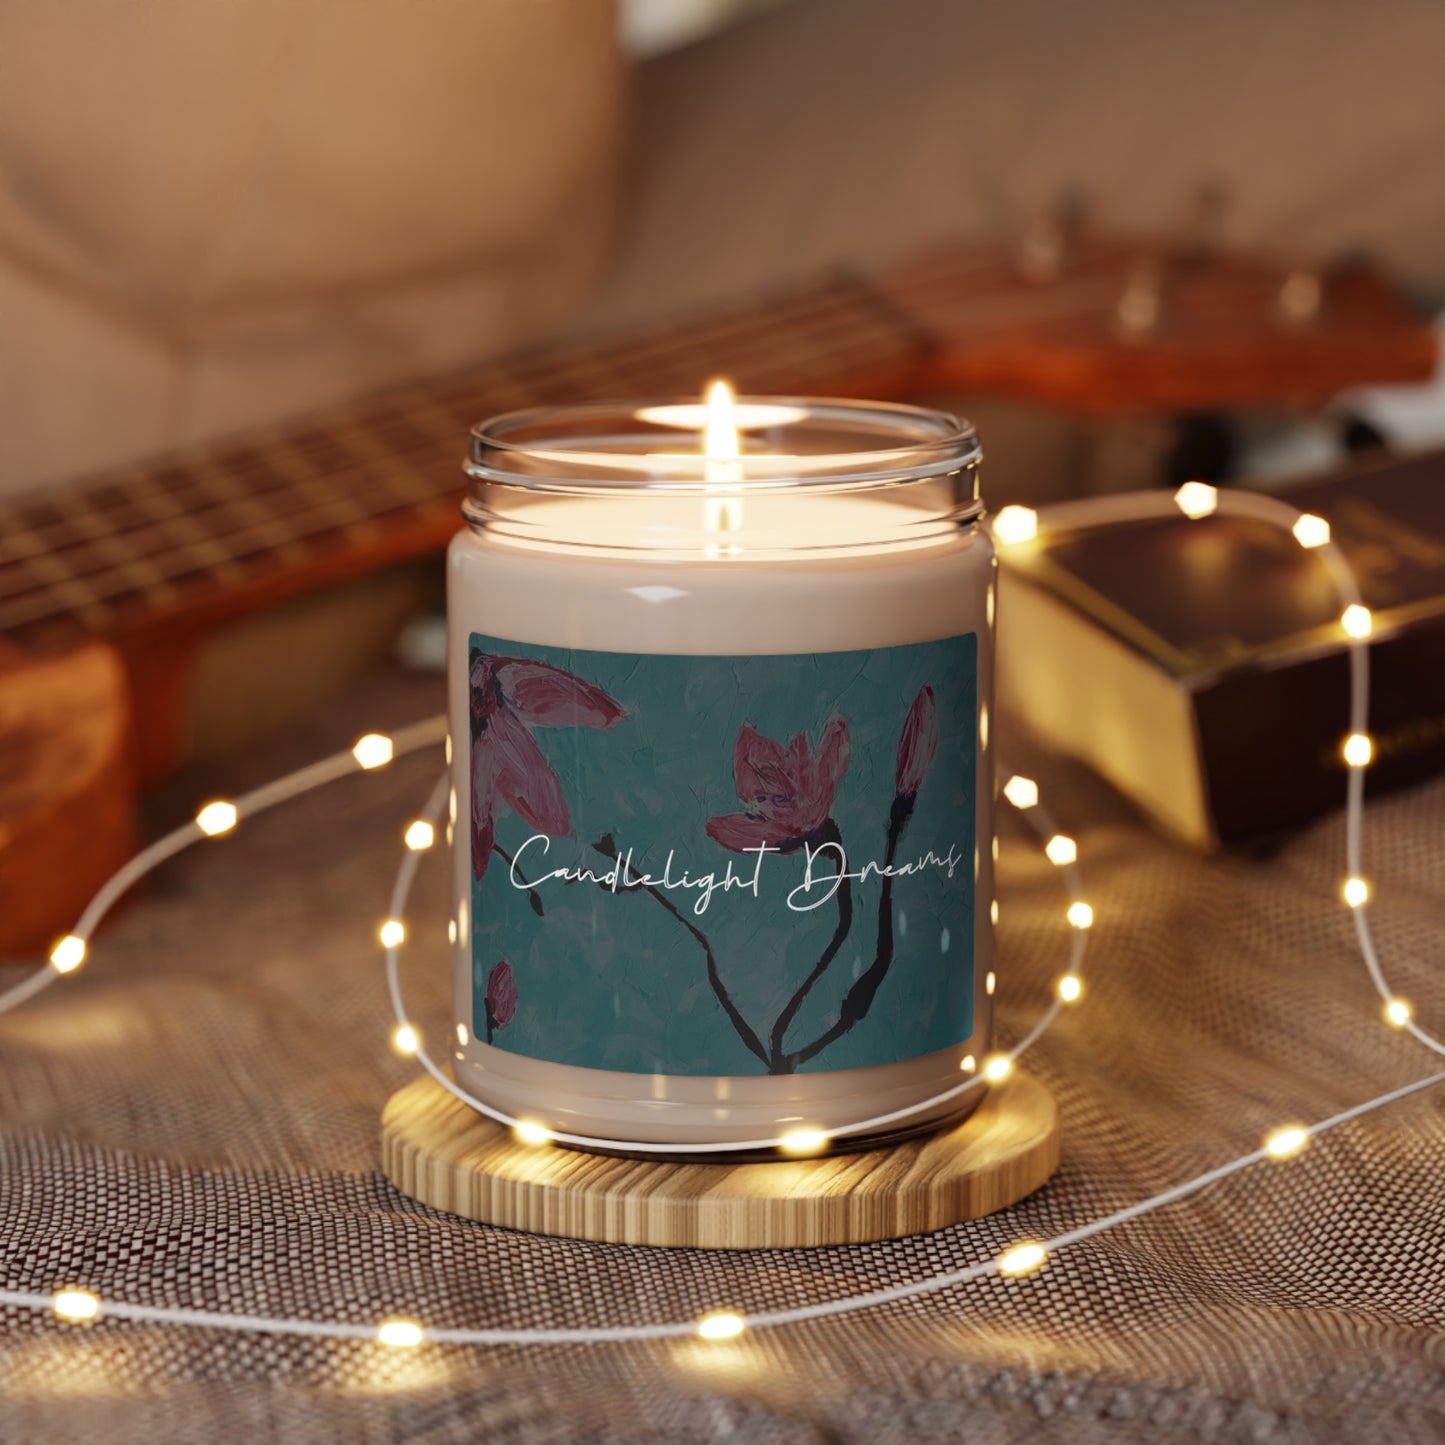 Scented Soy Candle "Candelight Dreams"